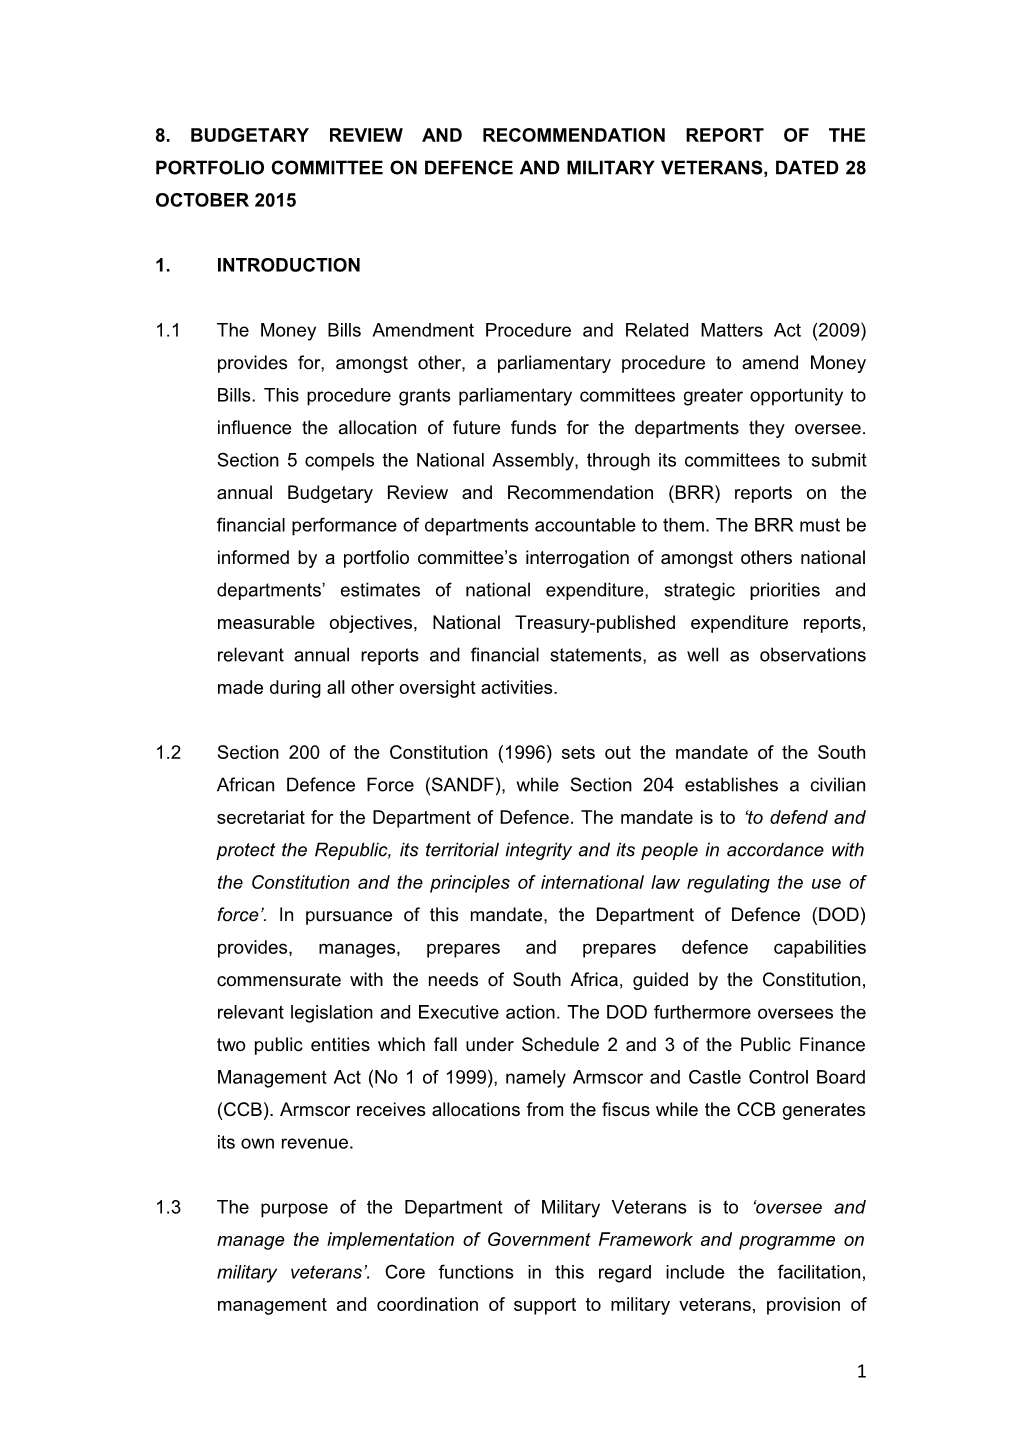 8. Budgetary Review and Recommendation Report of the Portfolio Committee on Defence And